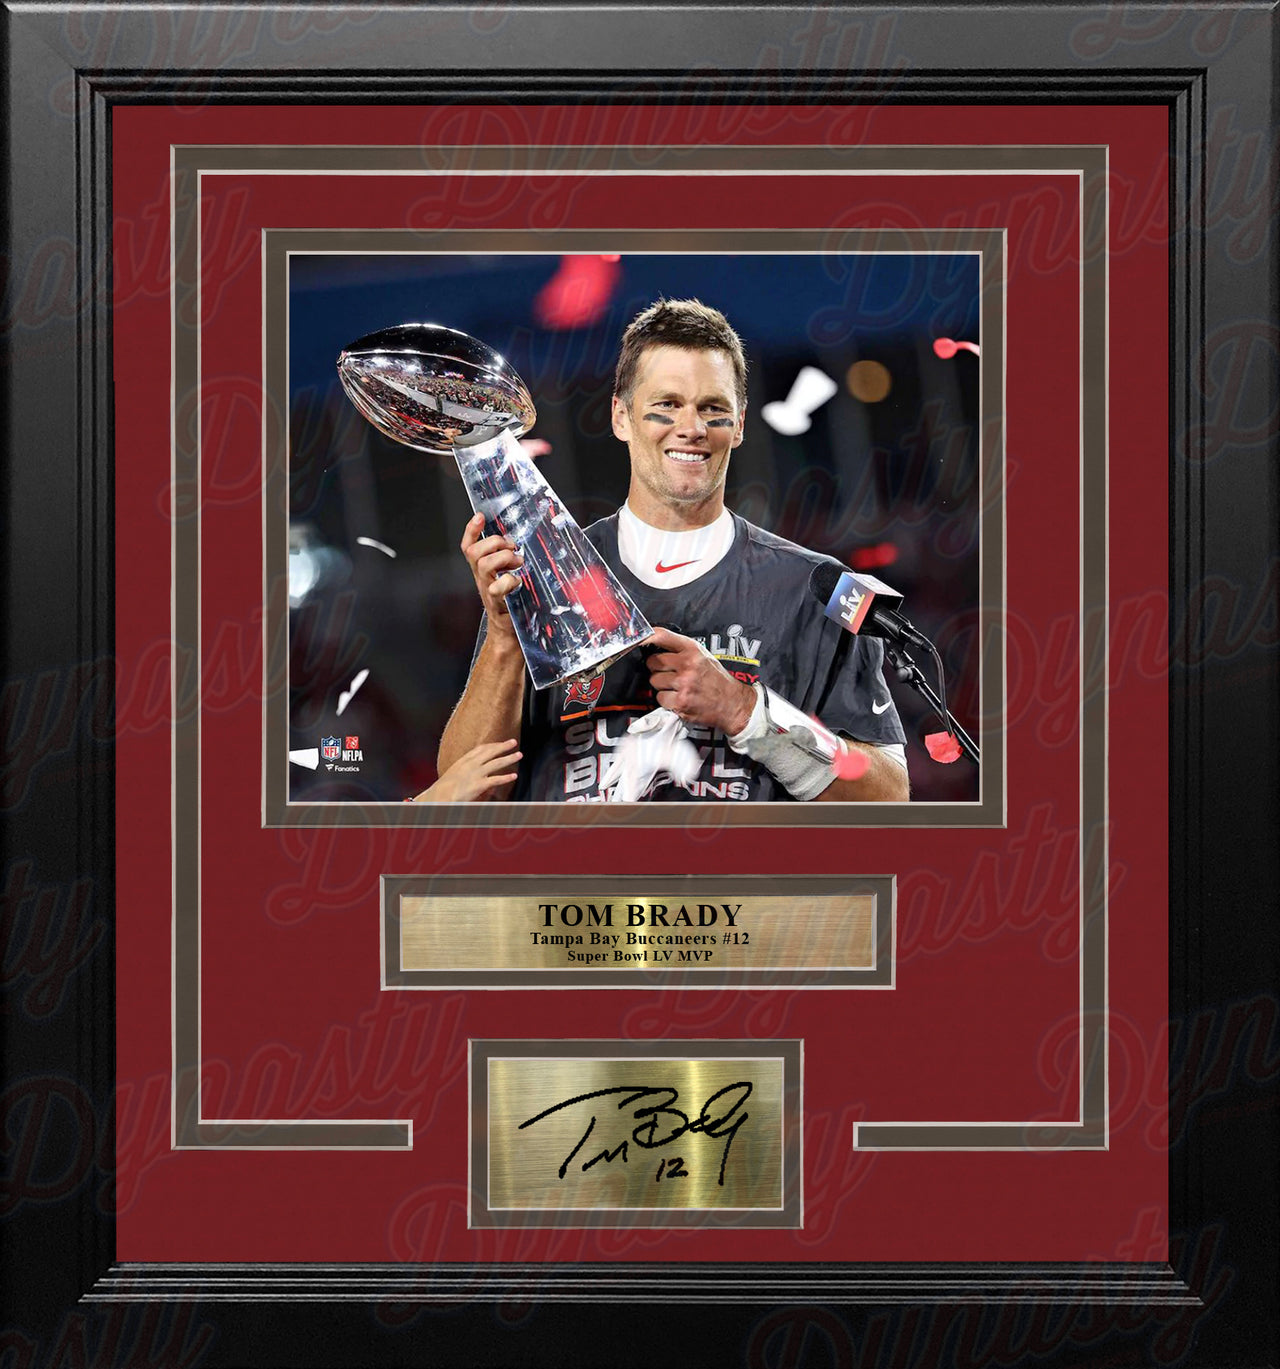 Tom Brady Super Bowl Champions Lombardi Trophy Buccaneers 8x10 Framed Photo with Engraved Autograph - Dynasty Sports & Framing 